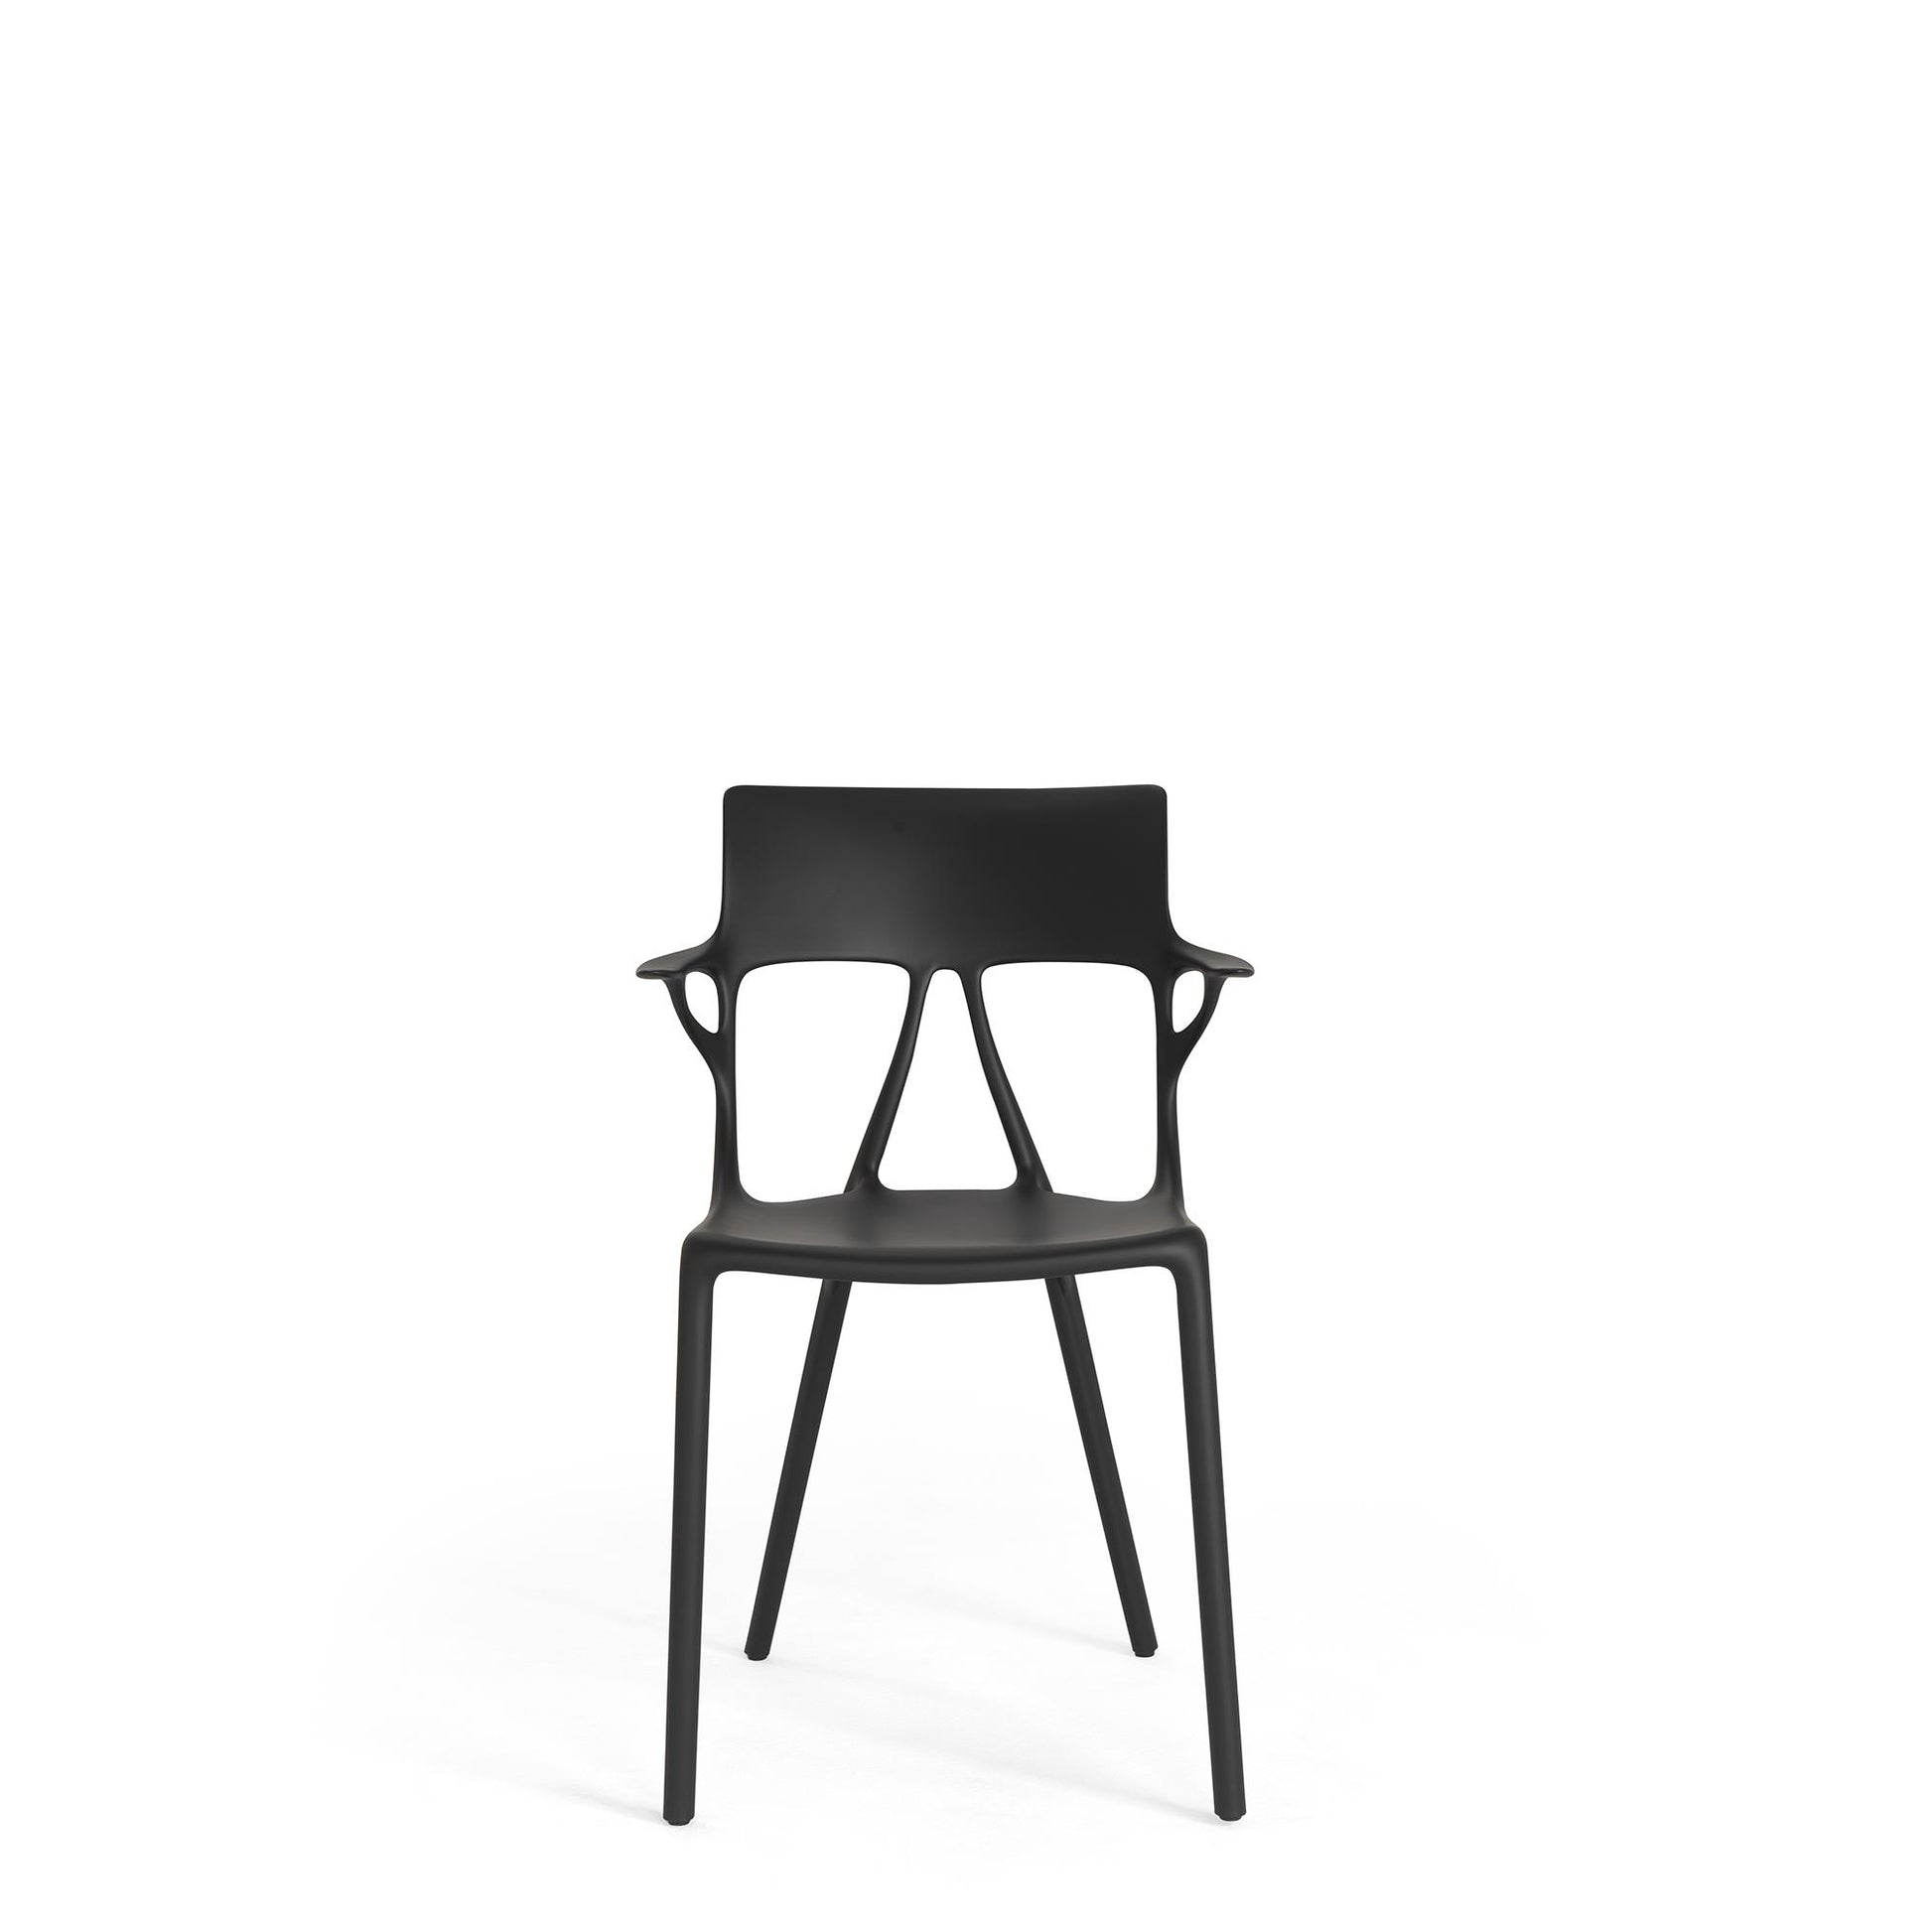 AI Dining Chair by Kartell #Black